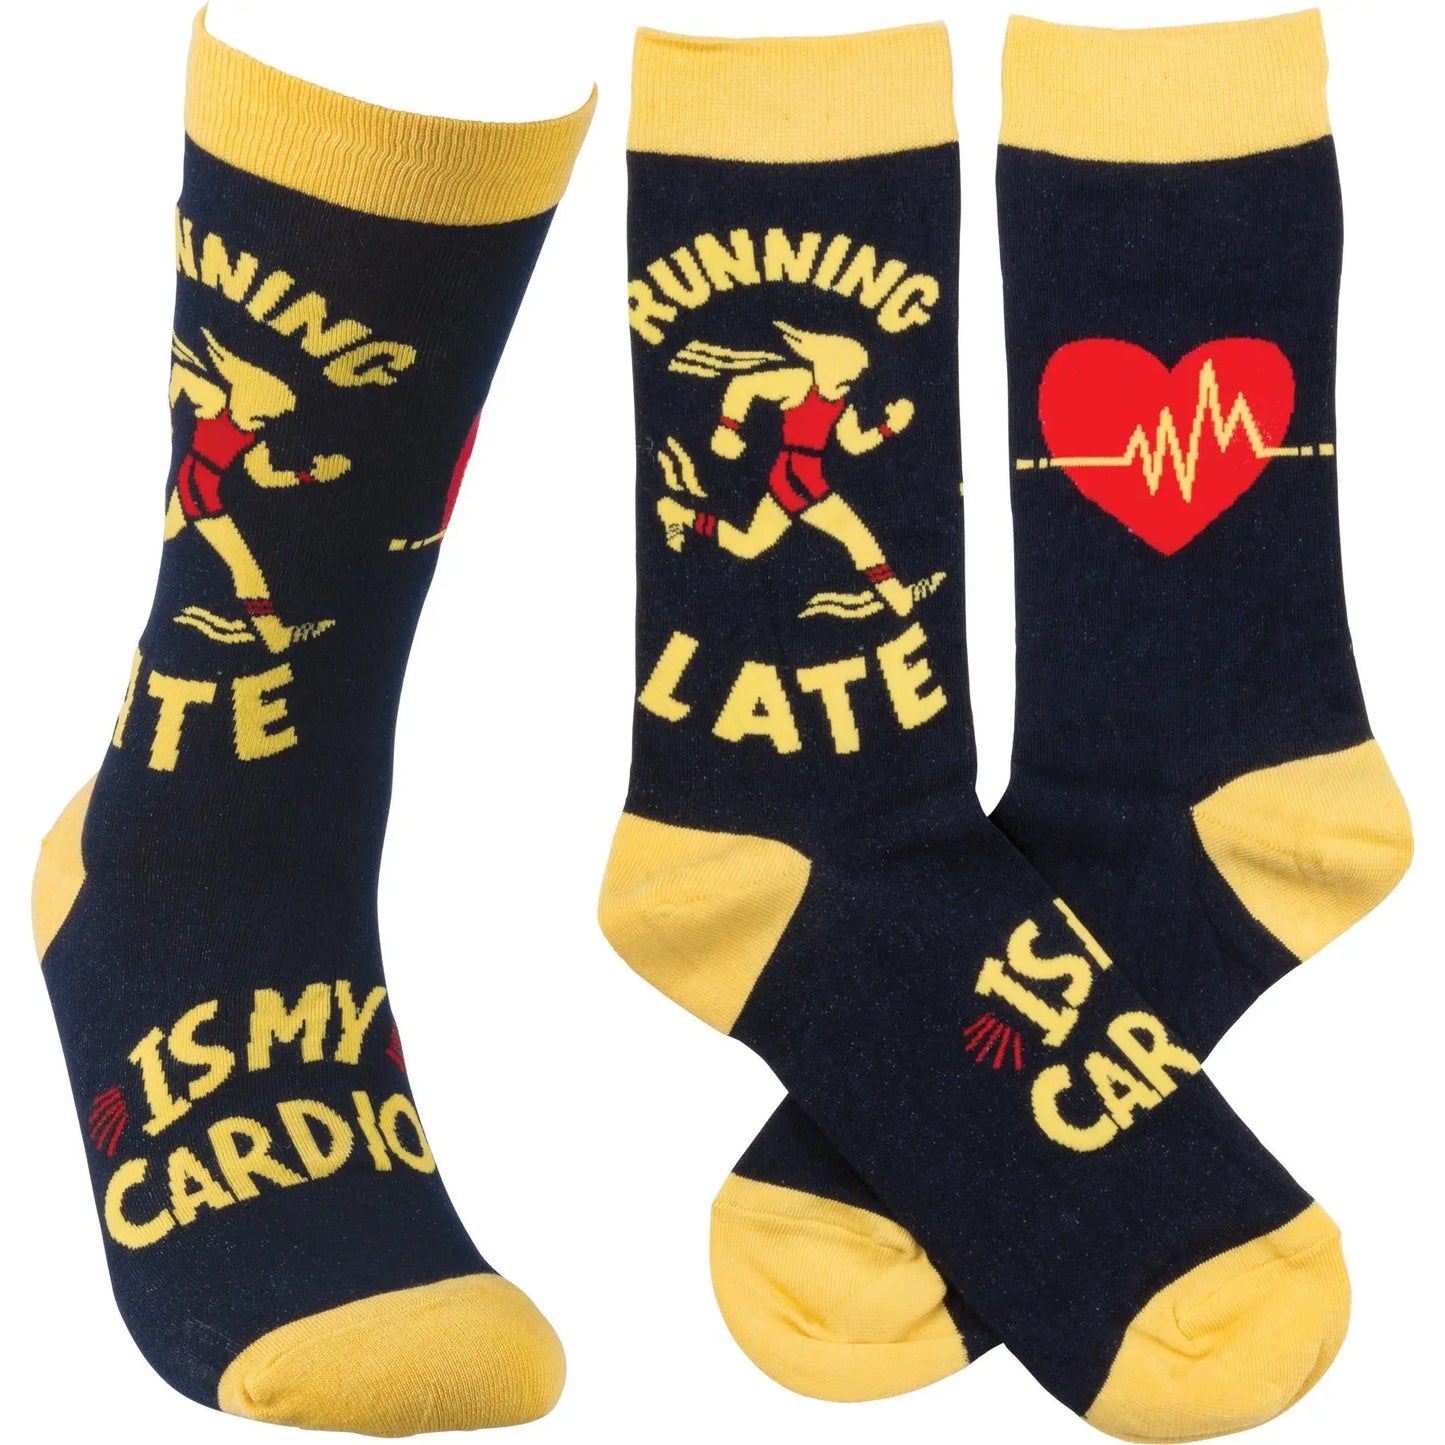 Primitives By Kathy - "Running Late" Socks PRIMITIVES BY KATHY